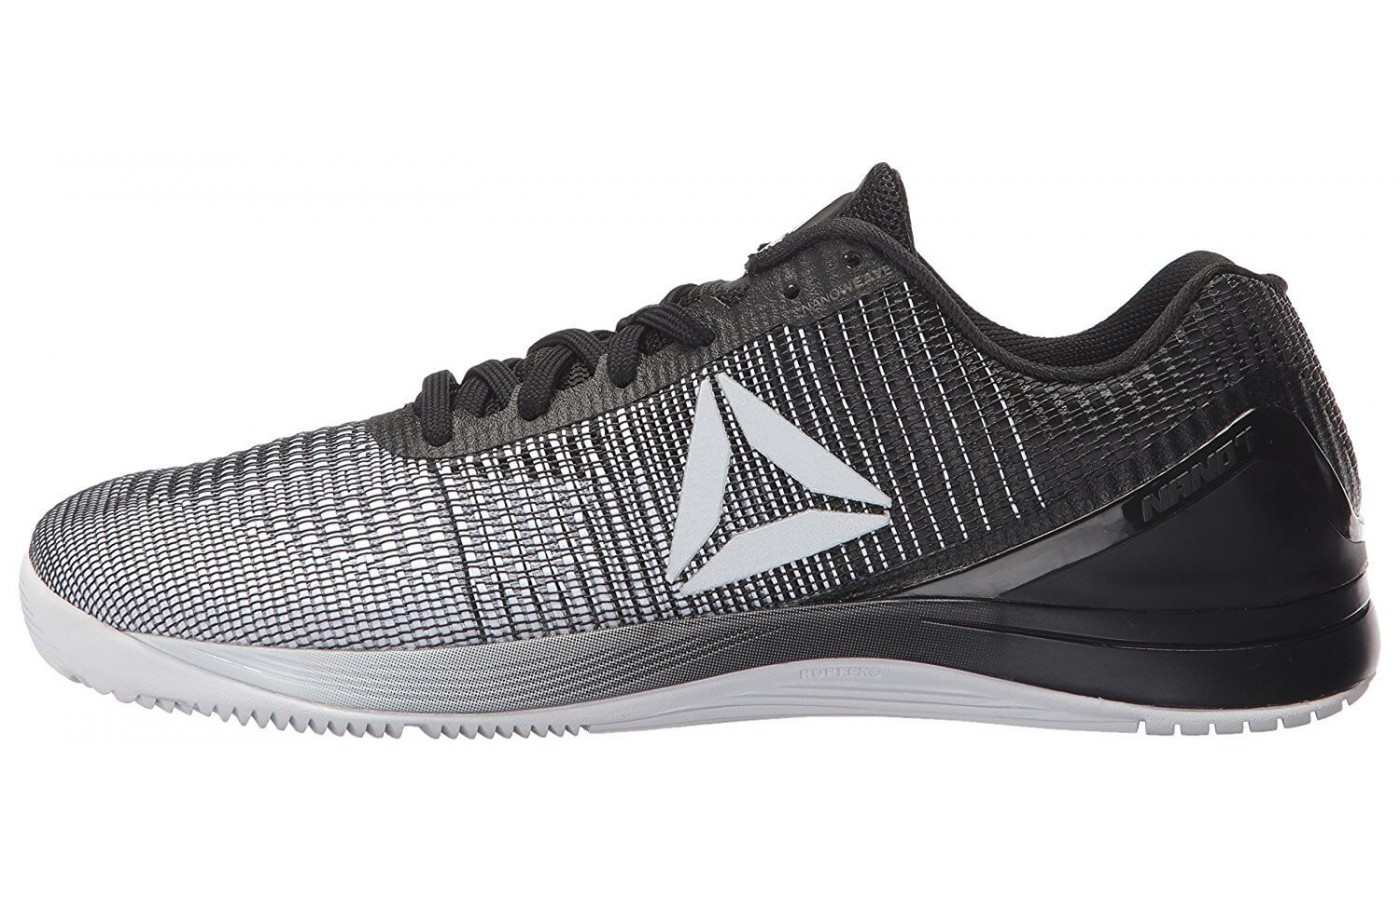 Due to the newly designed upper, the Reebok Crossfit Nano 7 Weave closely resembles traditional running shoes.